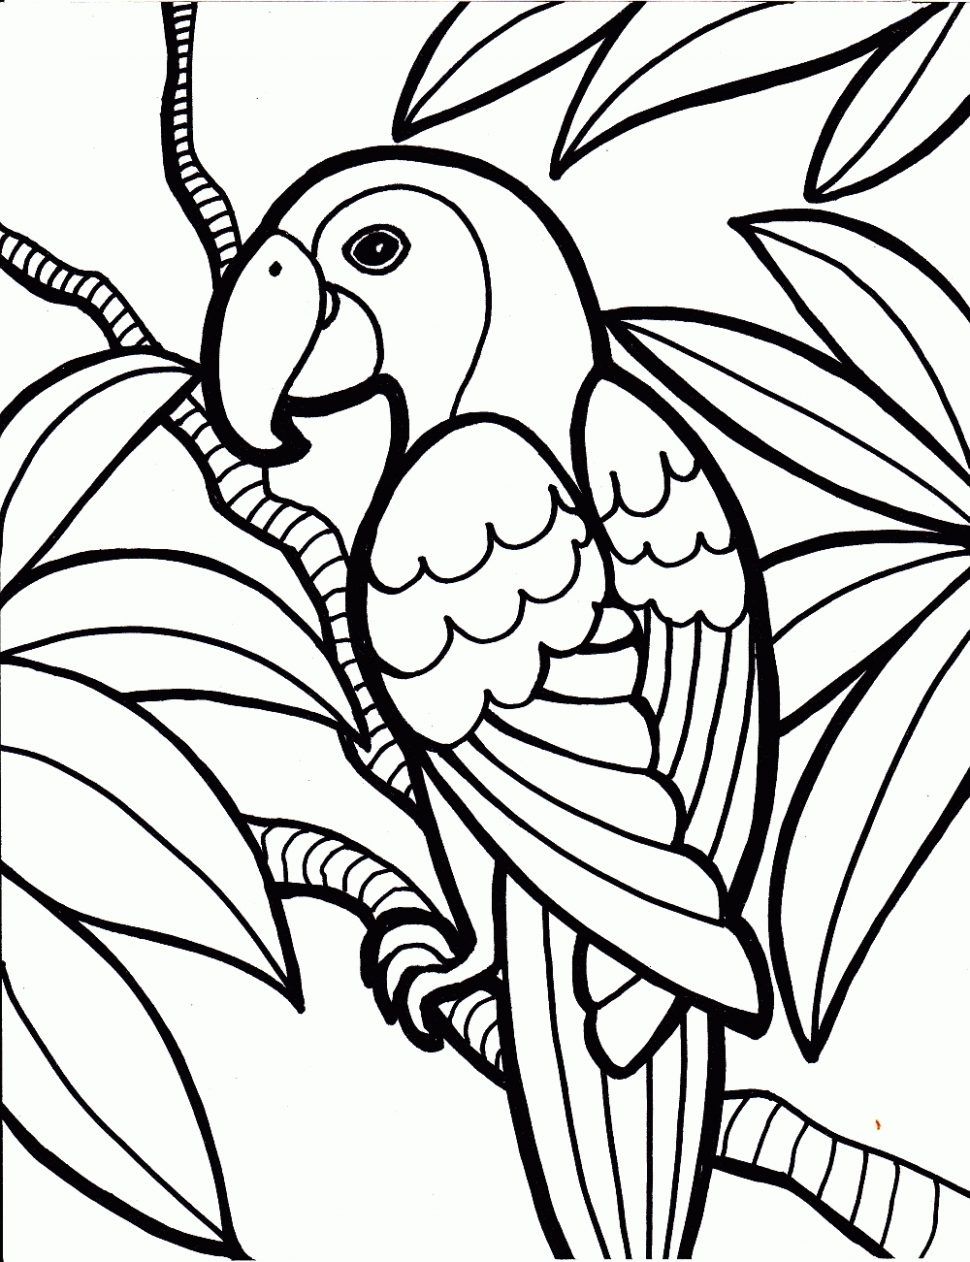 crayola-coloring-pages-for-kids-printable-at-getdrawings-free-download